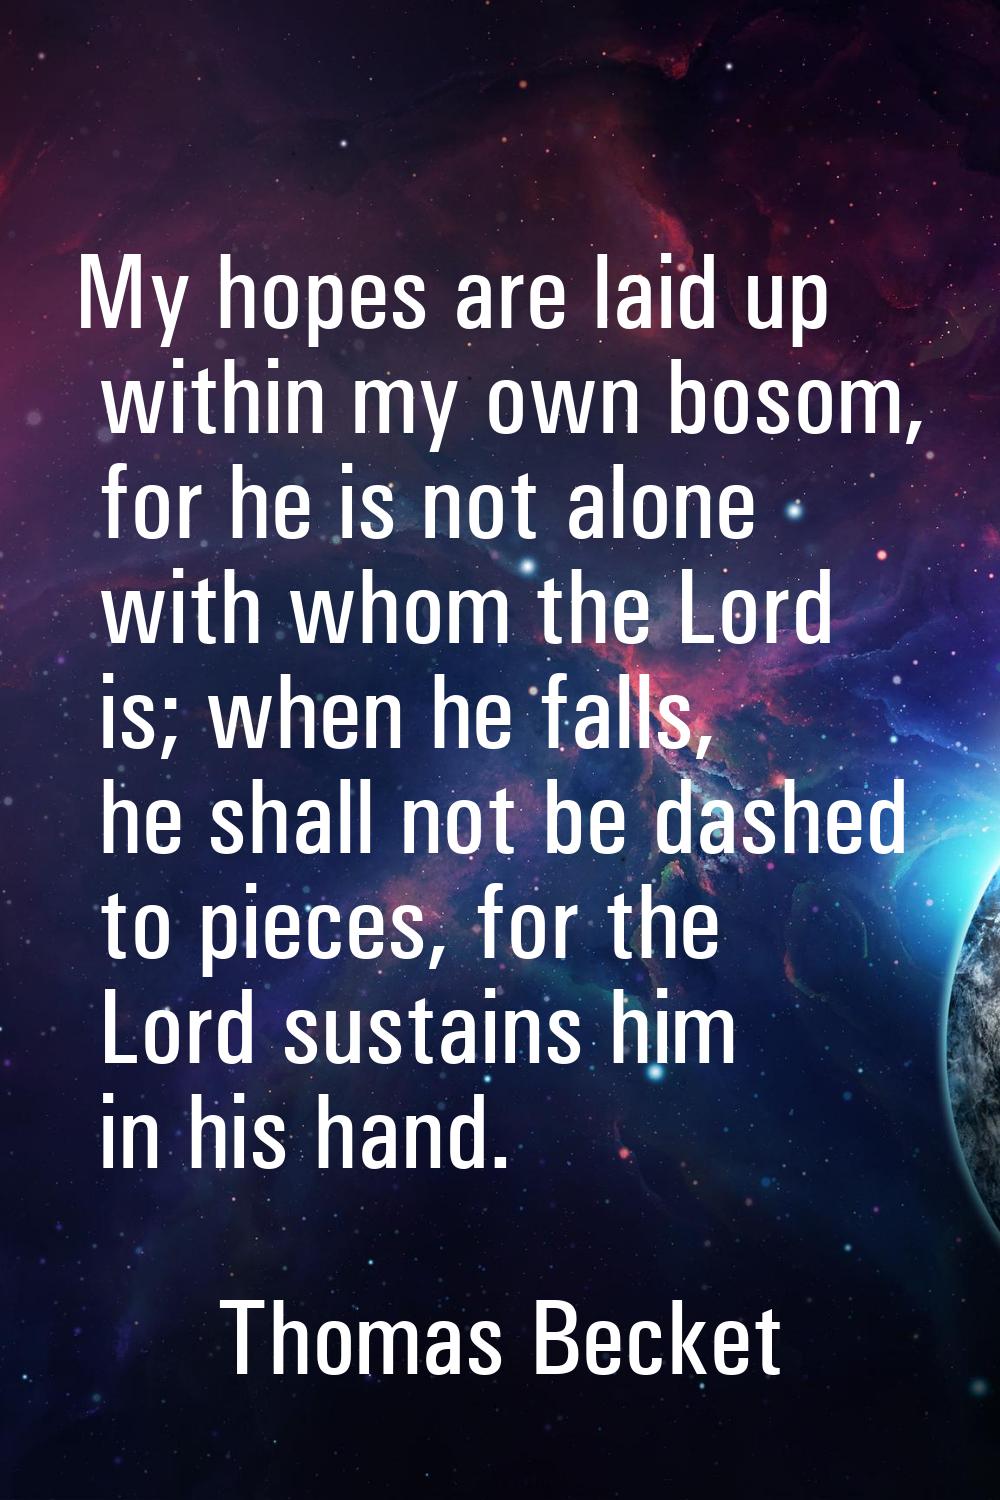 My hopes are laid up within my own bosom, for he is not alone with whom the Lord is; when he falls,